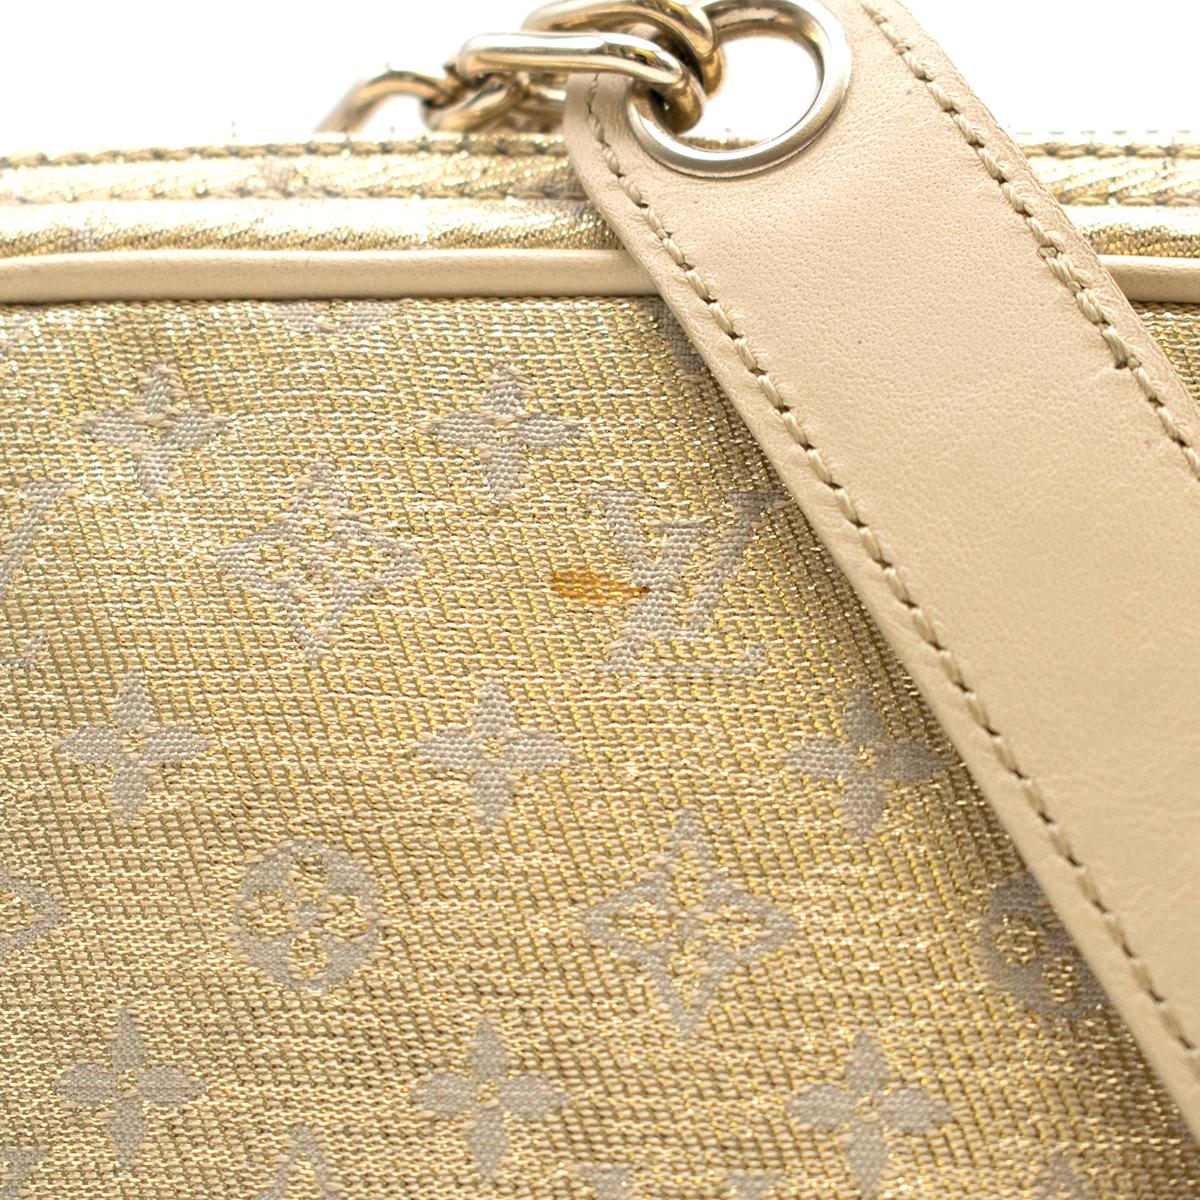 Women's Louis Vuitton Small Gold Limited Edition Monogram Bag